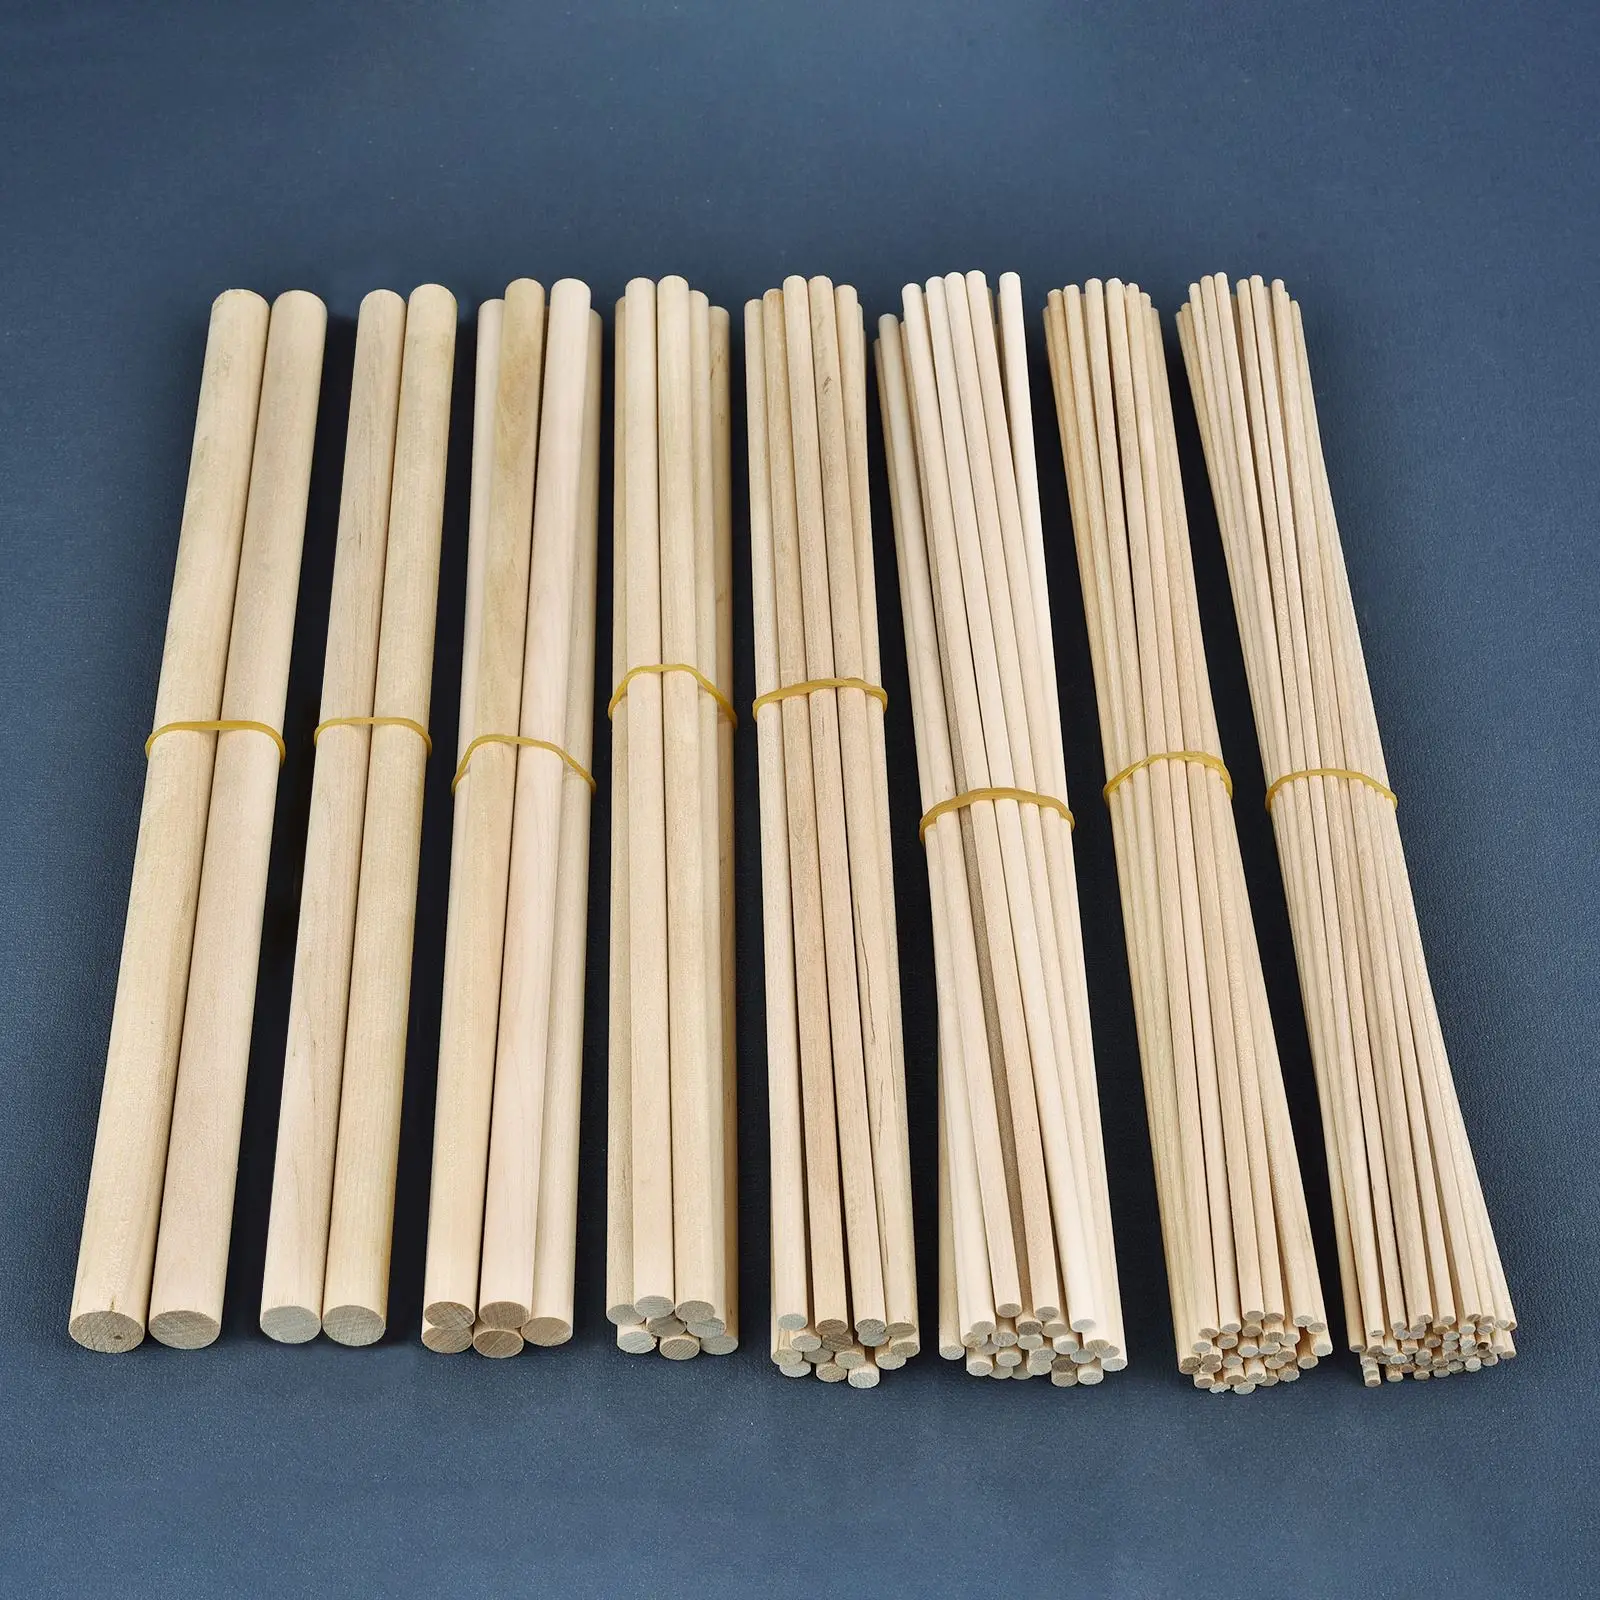 2-50pcs Round Wooden Stick For Craft Food Ice Lollies And Model Making Cake Dowel Kids DIY Building Model Tools 10/15/20/30cm